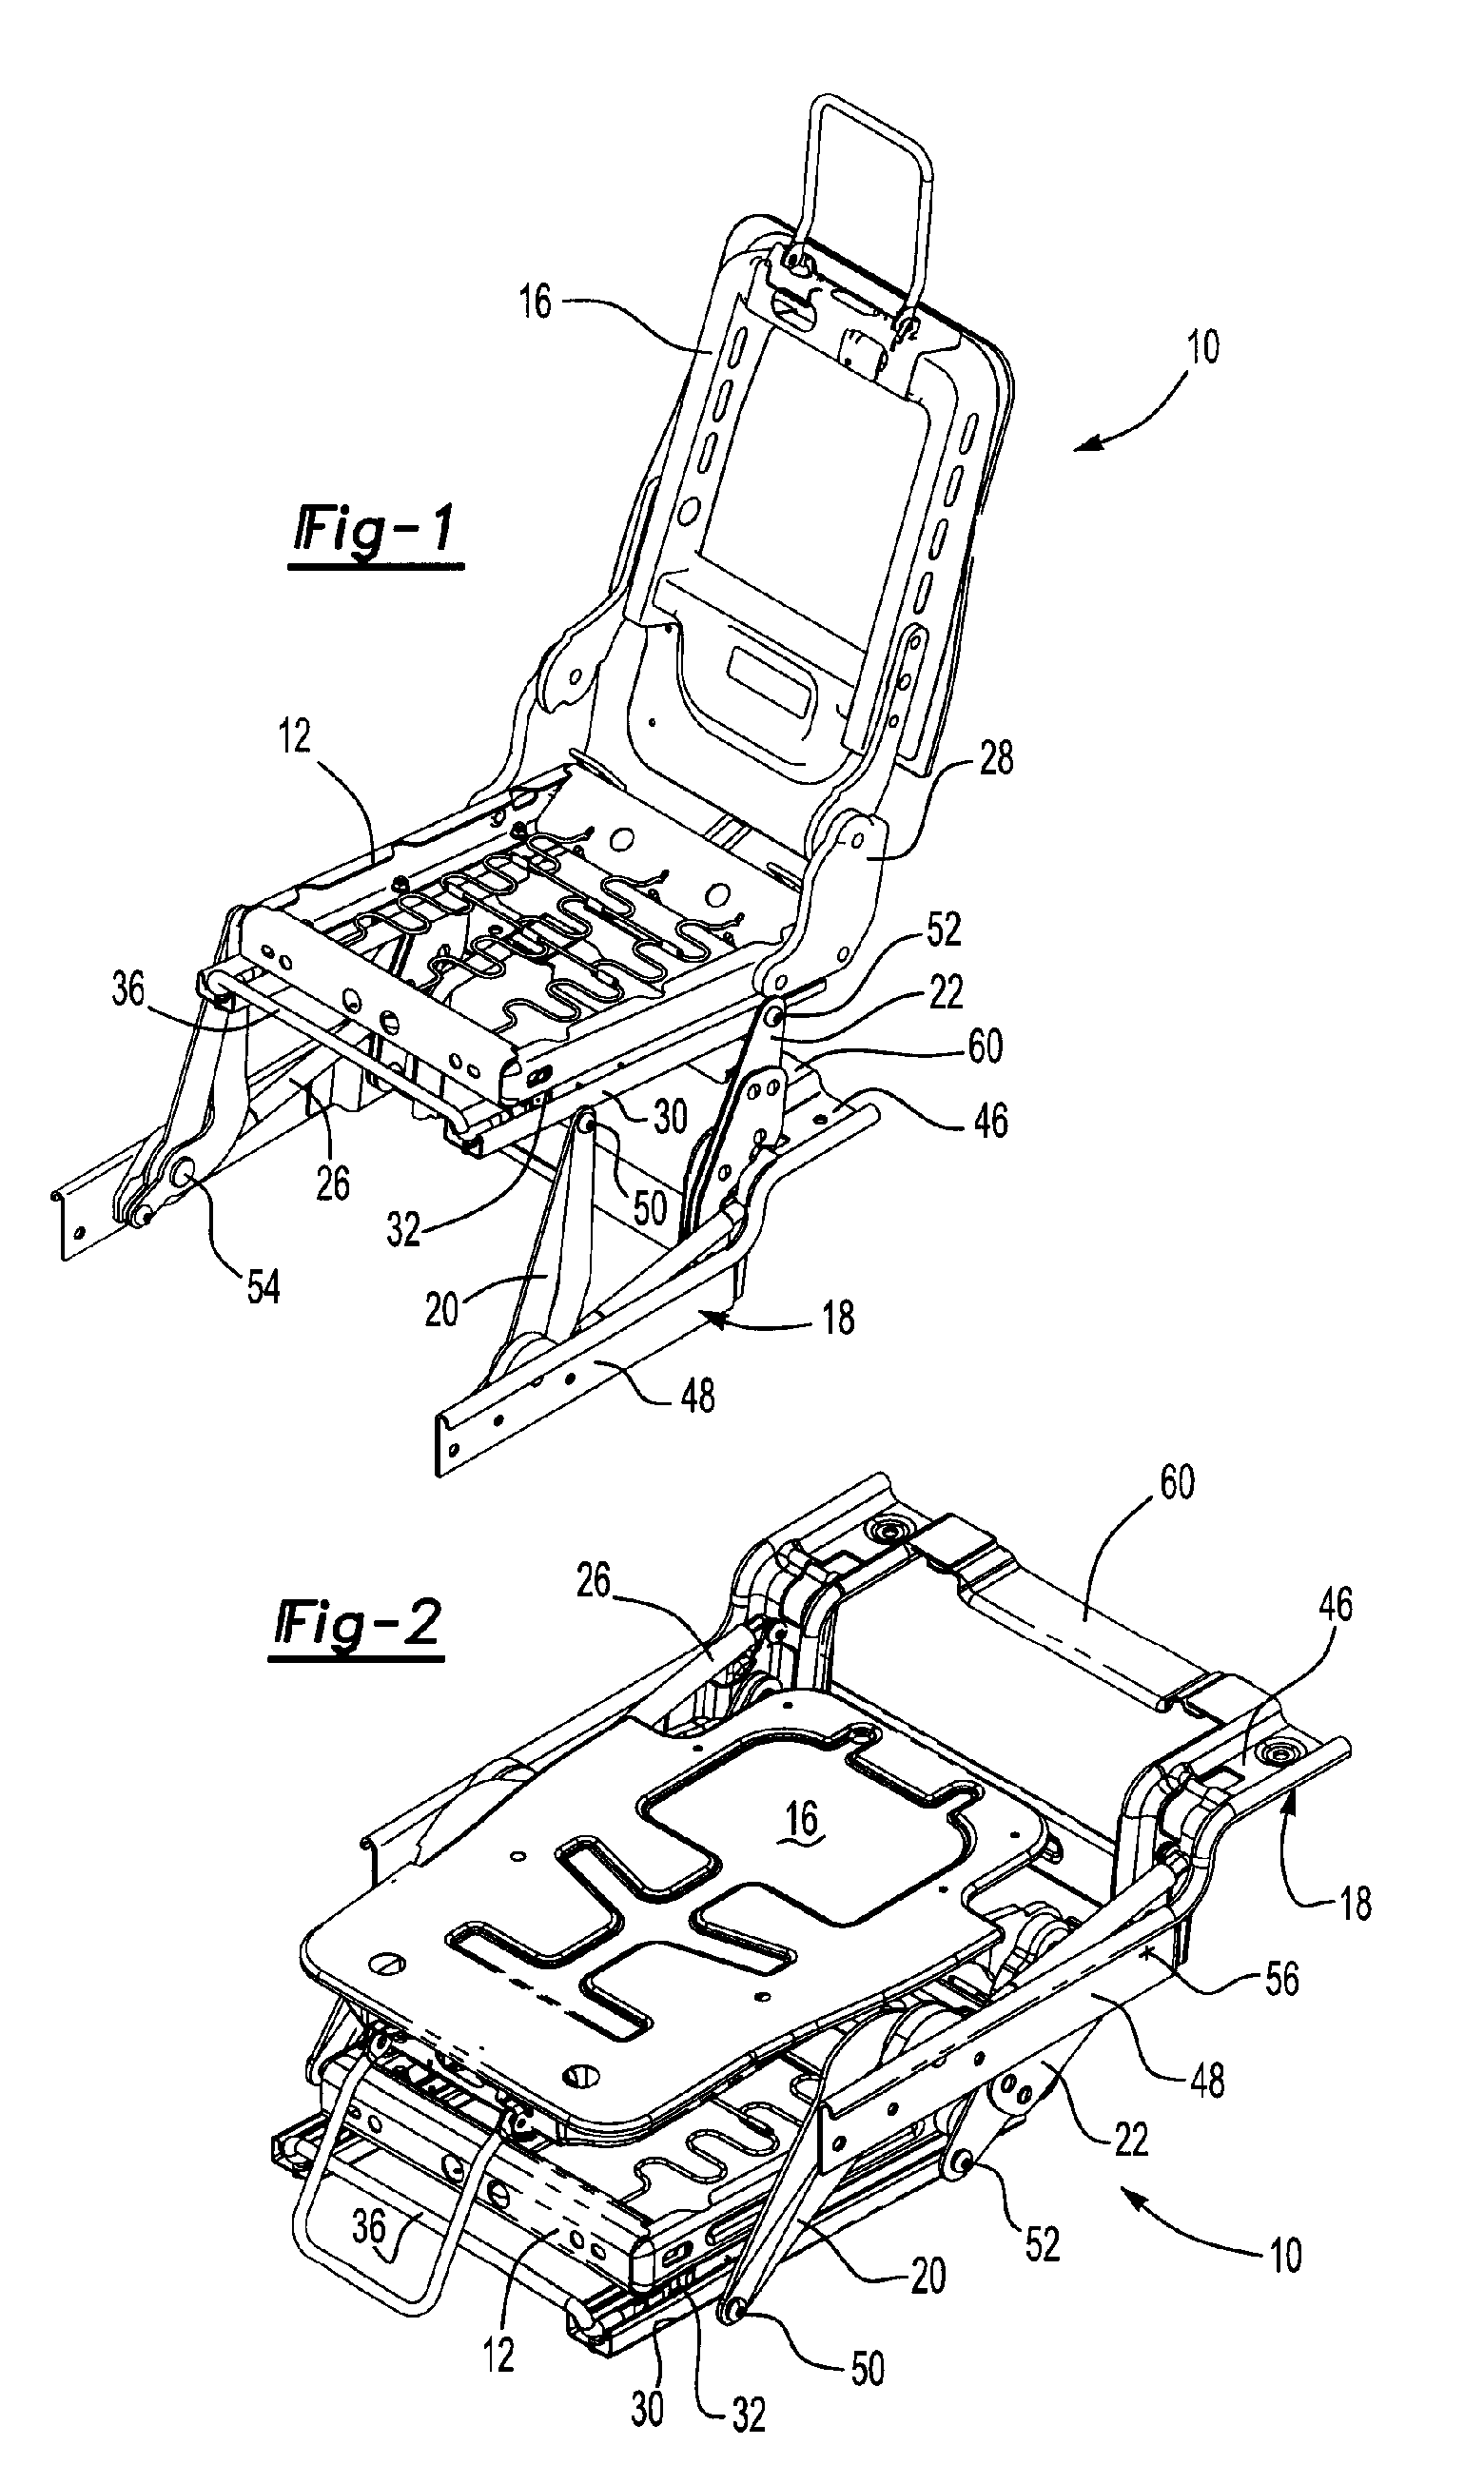 Vehicle seat that tips and kneels and folds into a stowage well